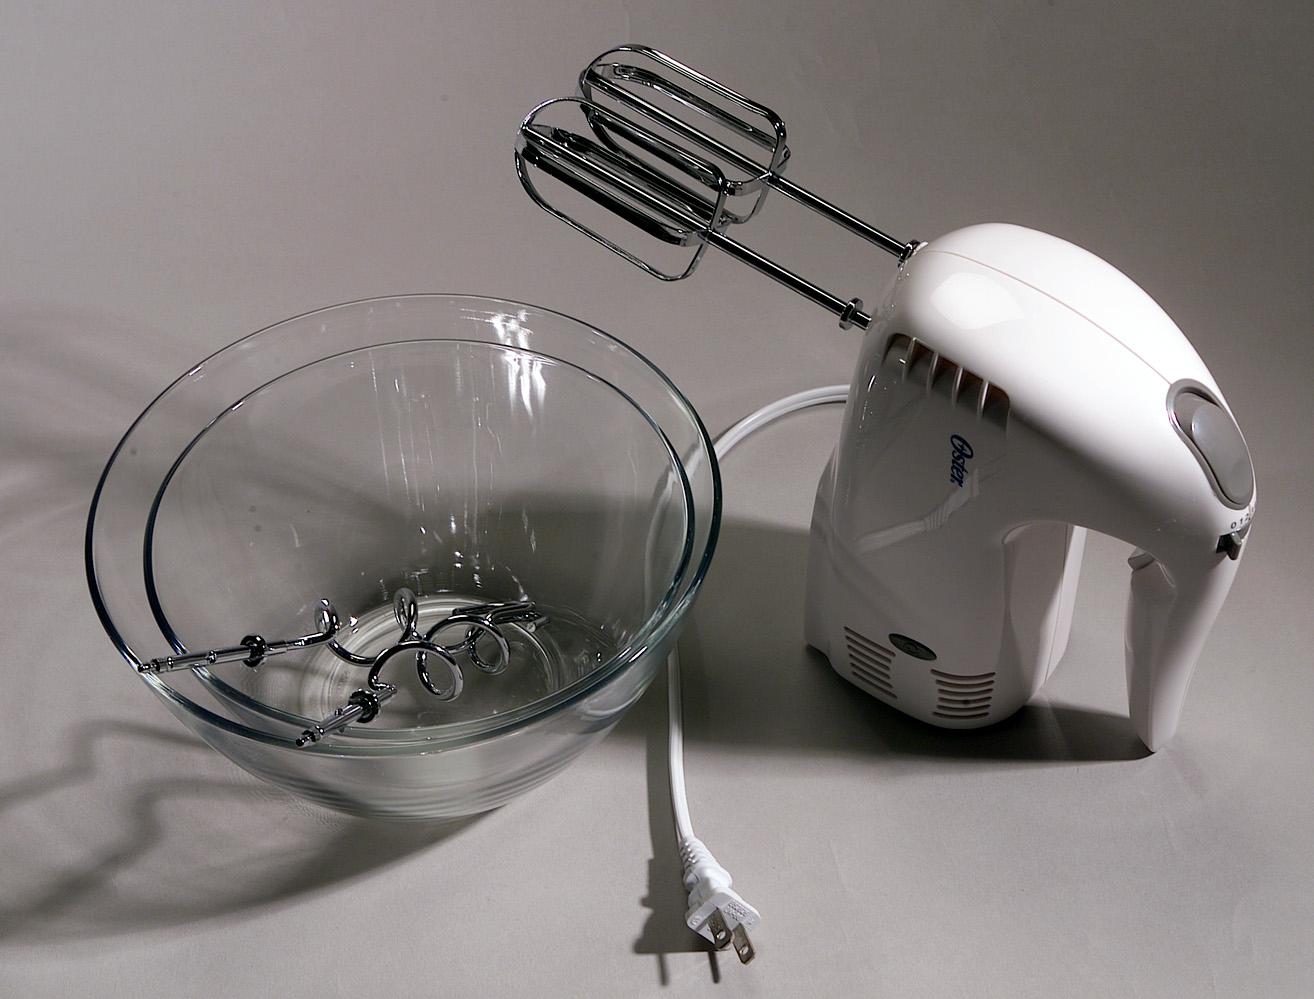 People Are in Complete Awe of This Viral Electric Mixer Hack